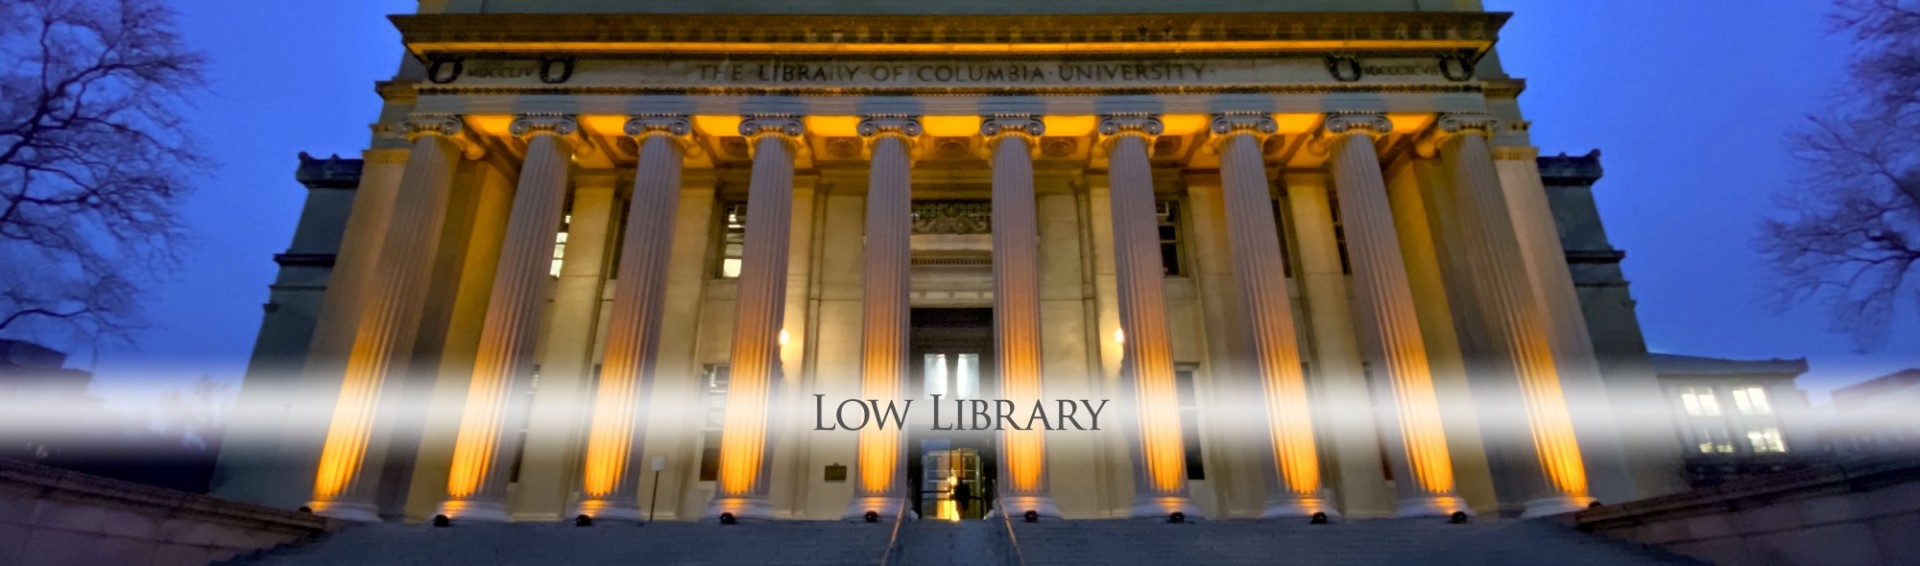 Low Library